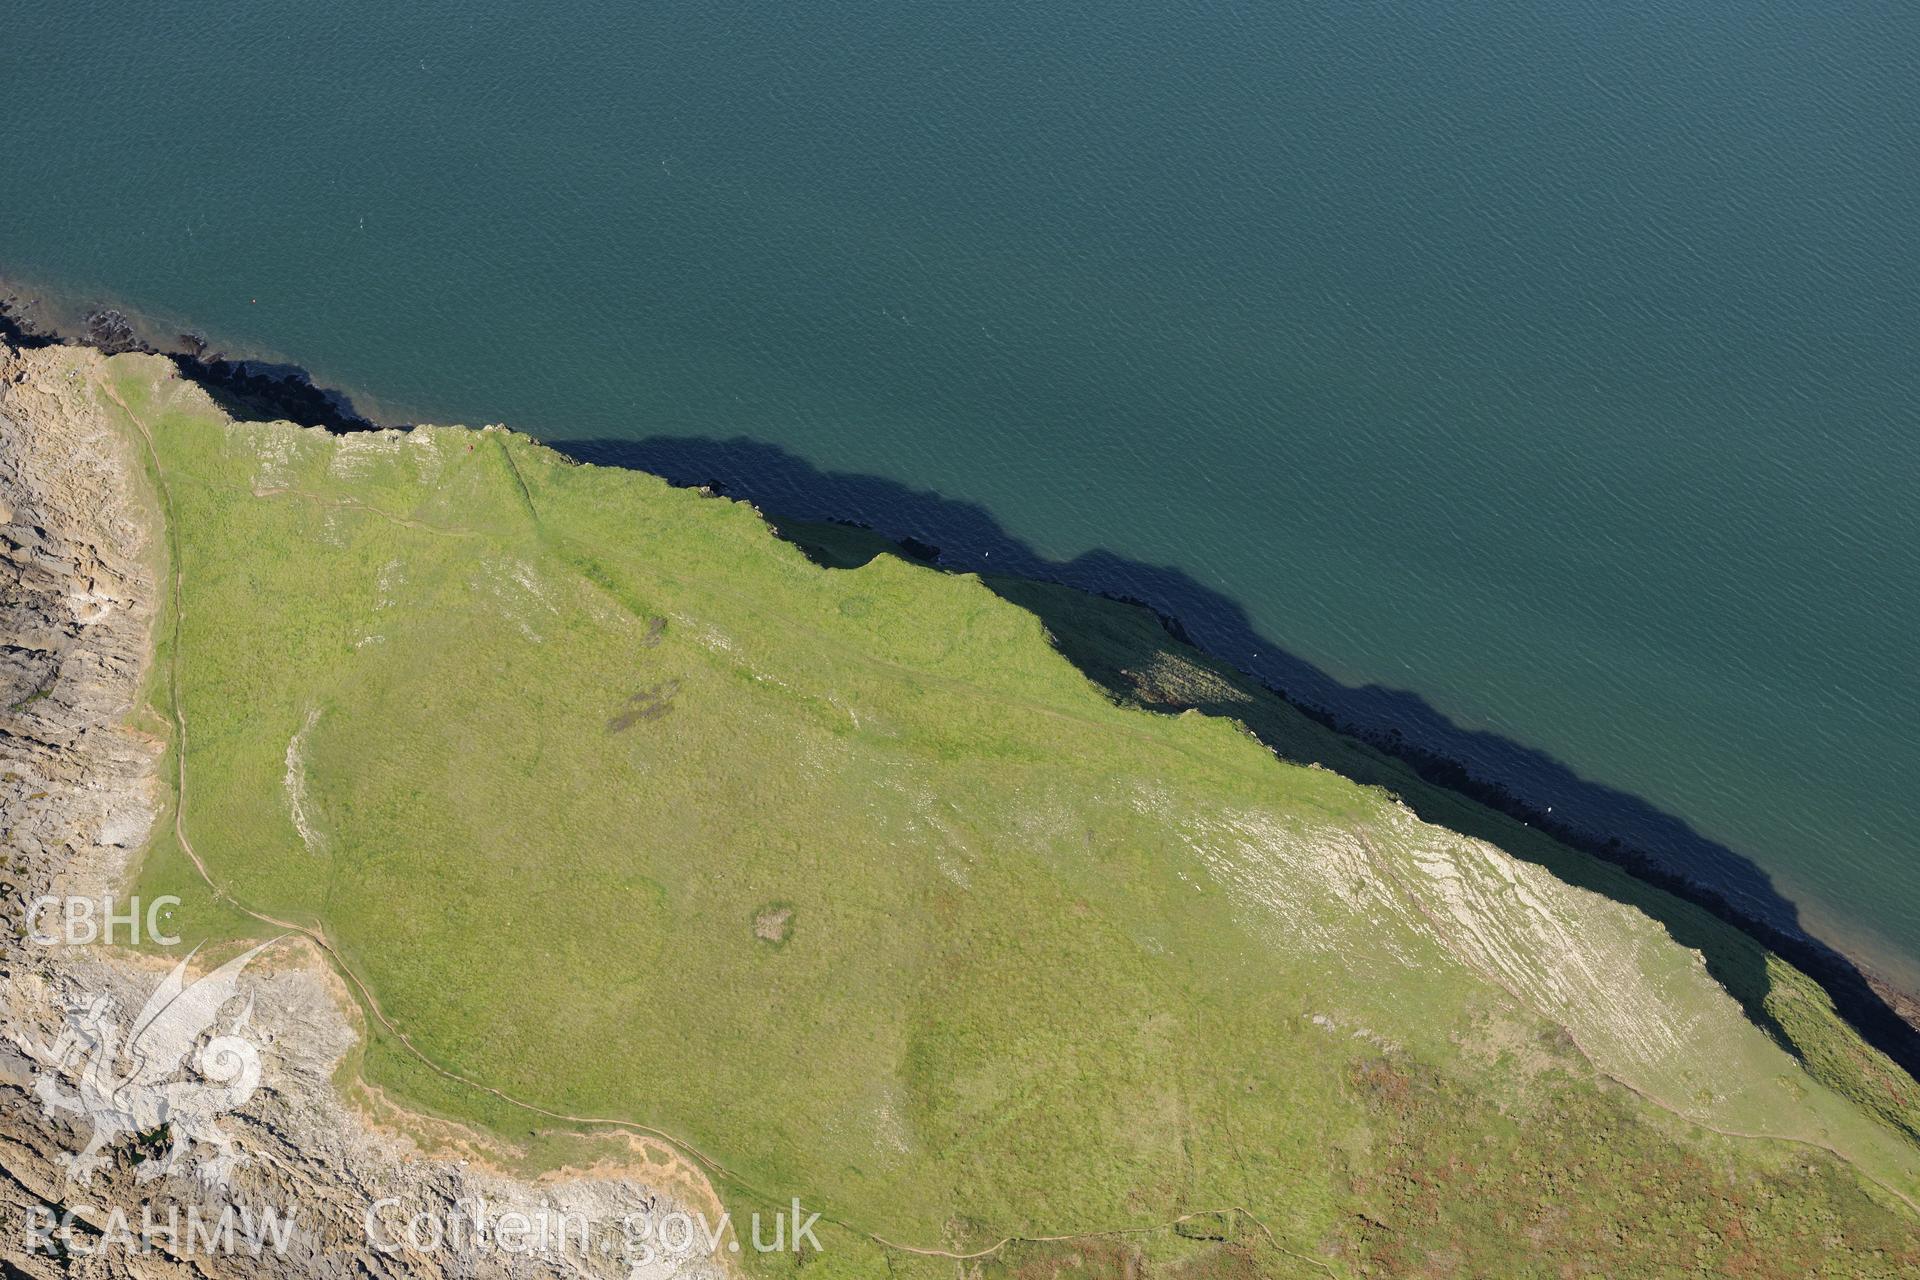 Worm's Head and the enclosure on its north eastern side, near Rhossili, on the western coast of the Gower Peninsula. Oblique aerial photograph taken during the Royal Commission's programme of archaeological aerial reconnaissance by Toby Driver on 30th September 2015.